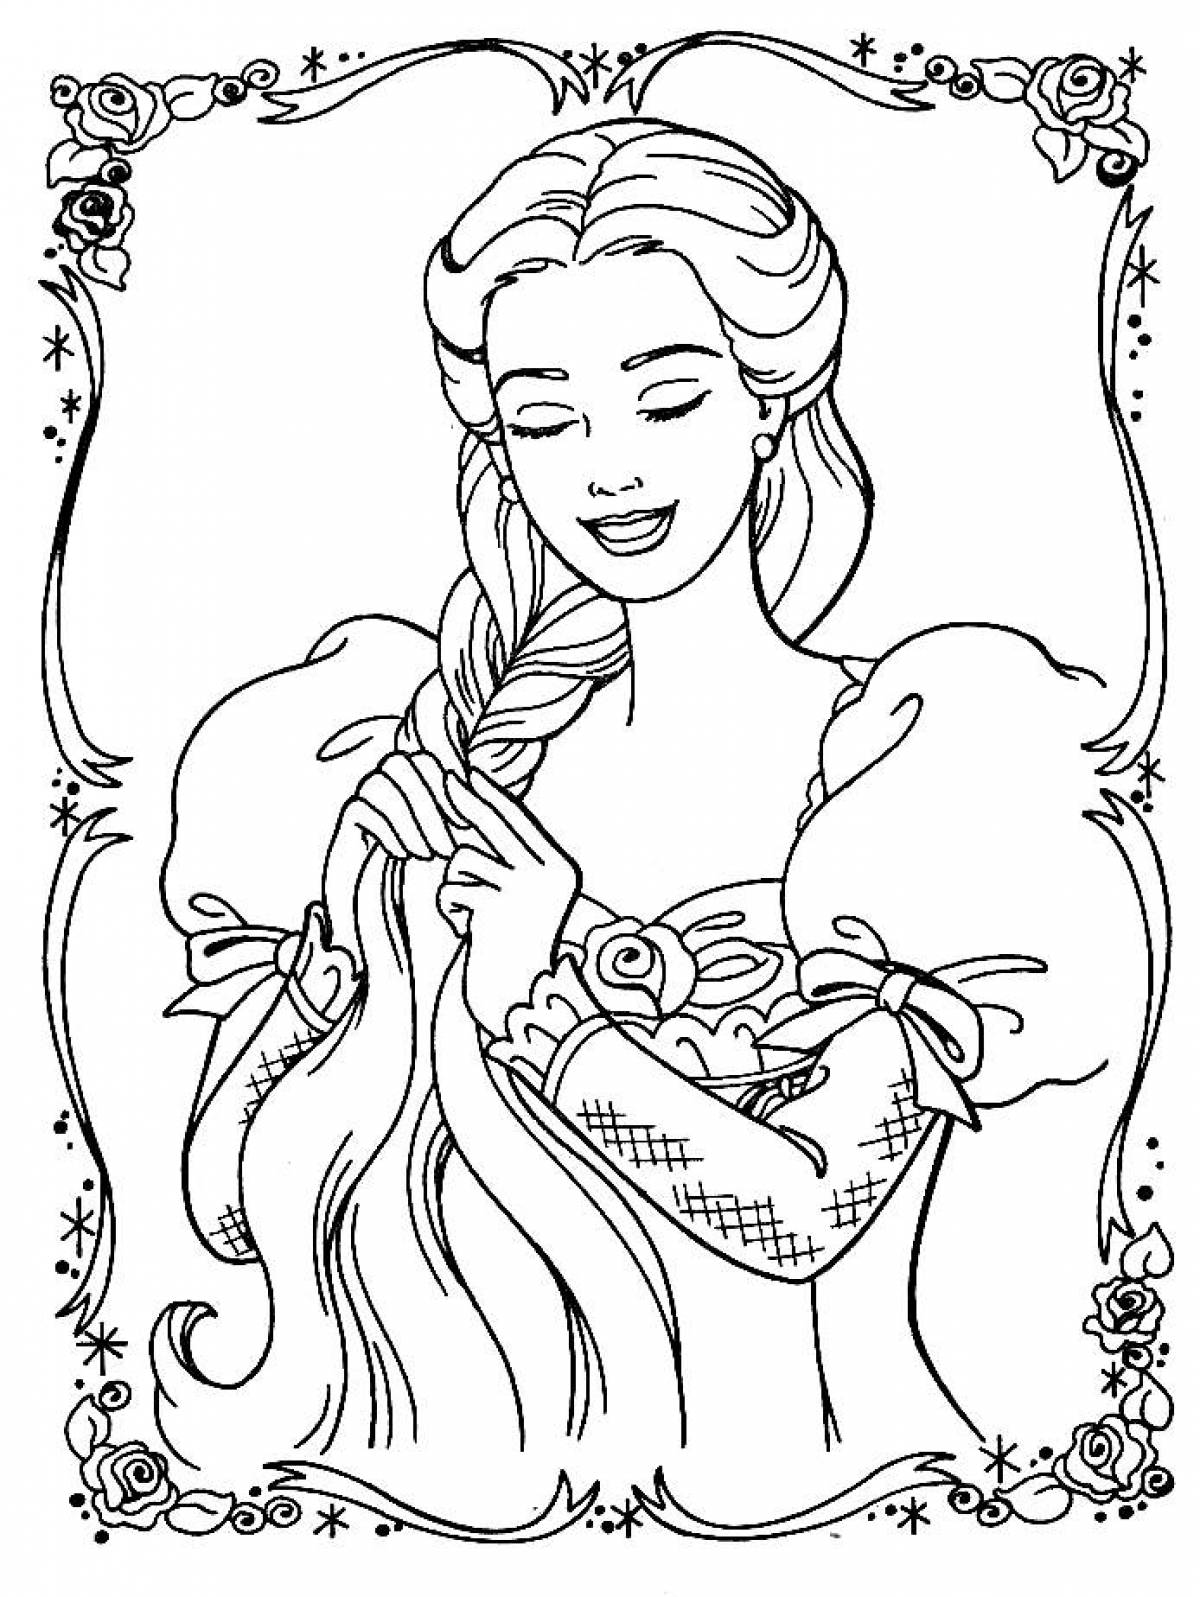 Barbie coloring pages online for girls